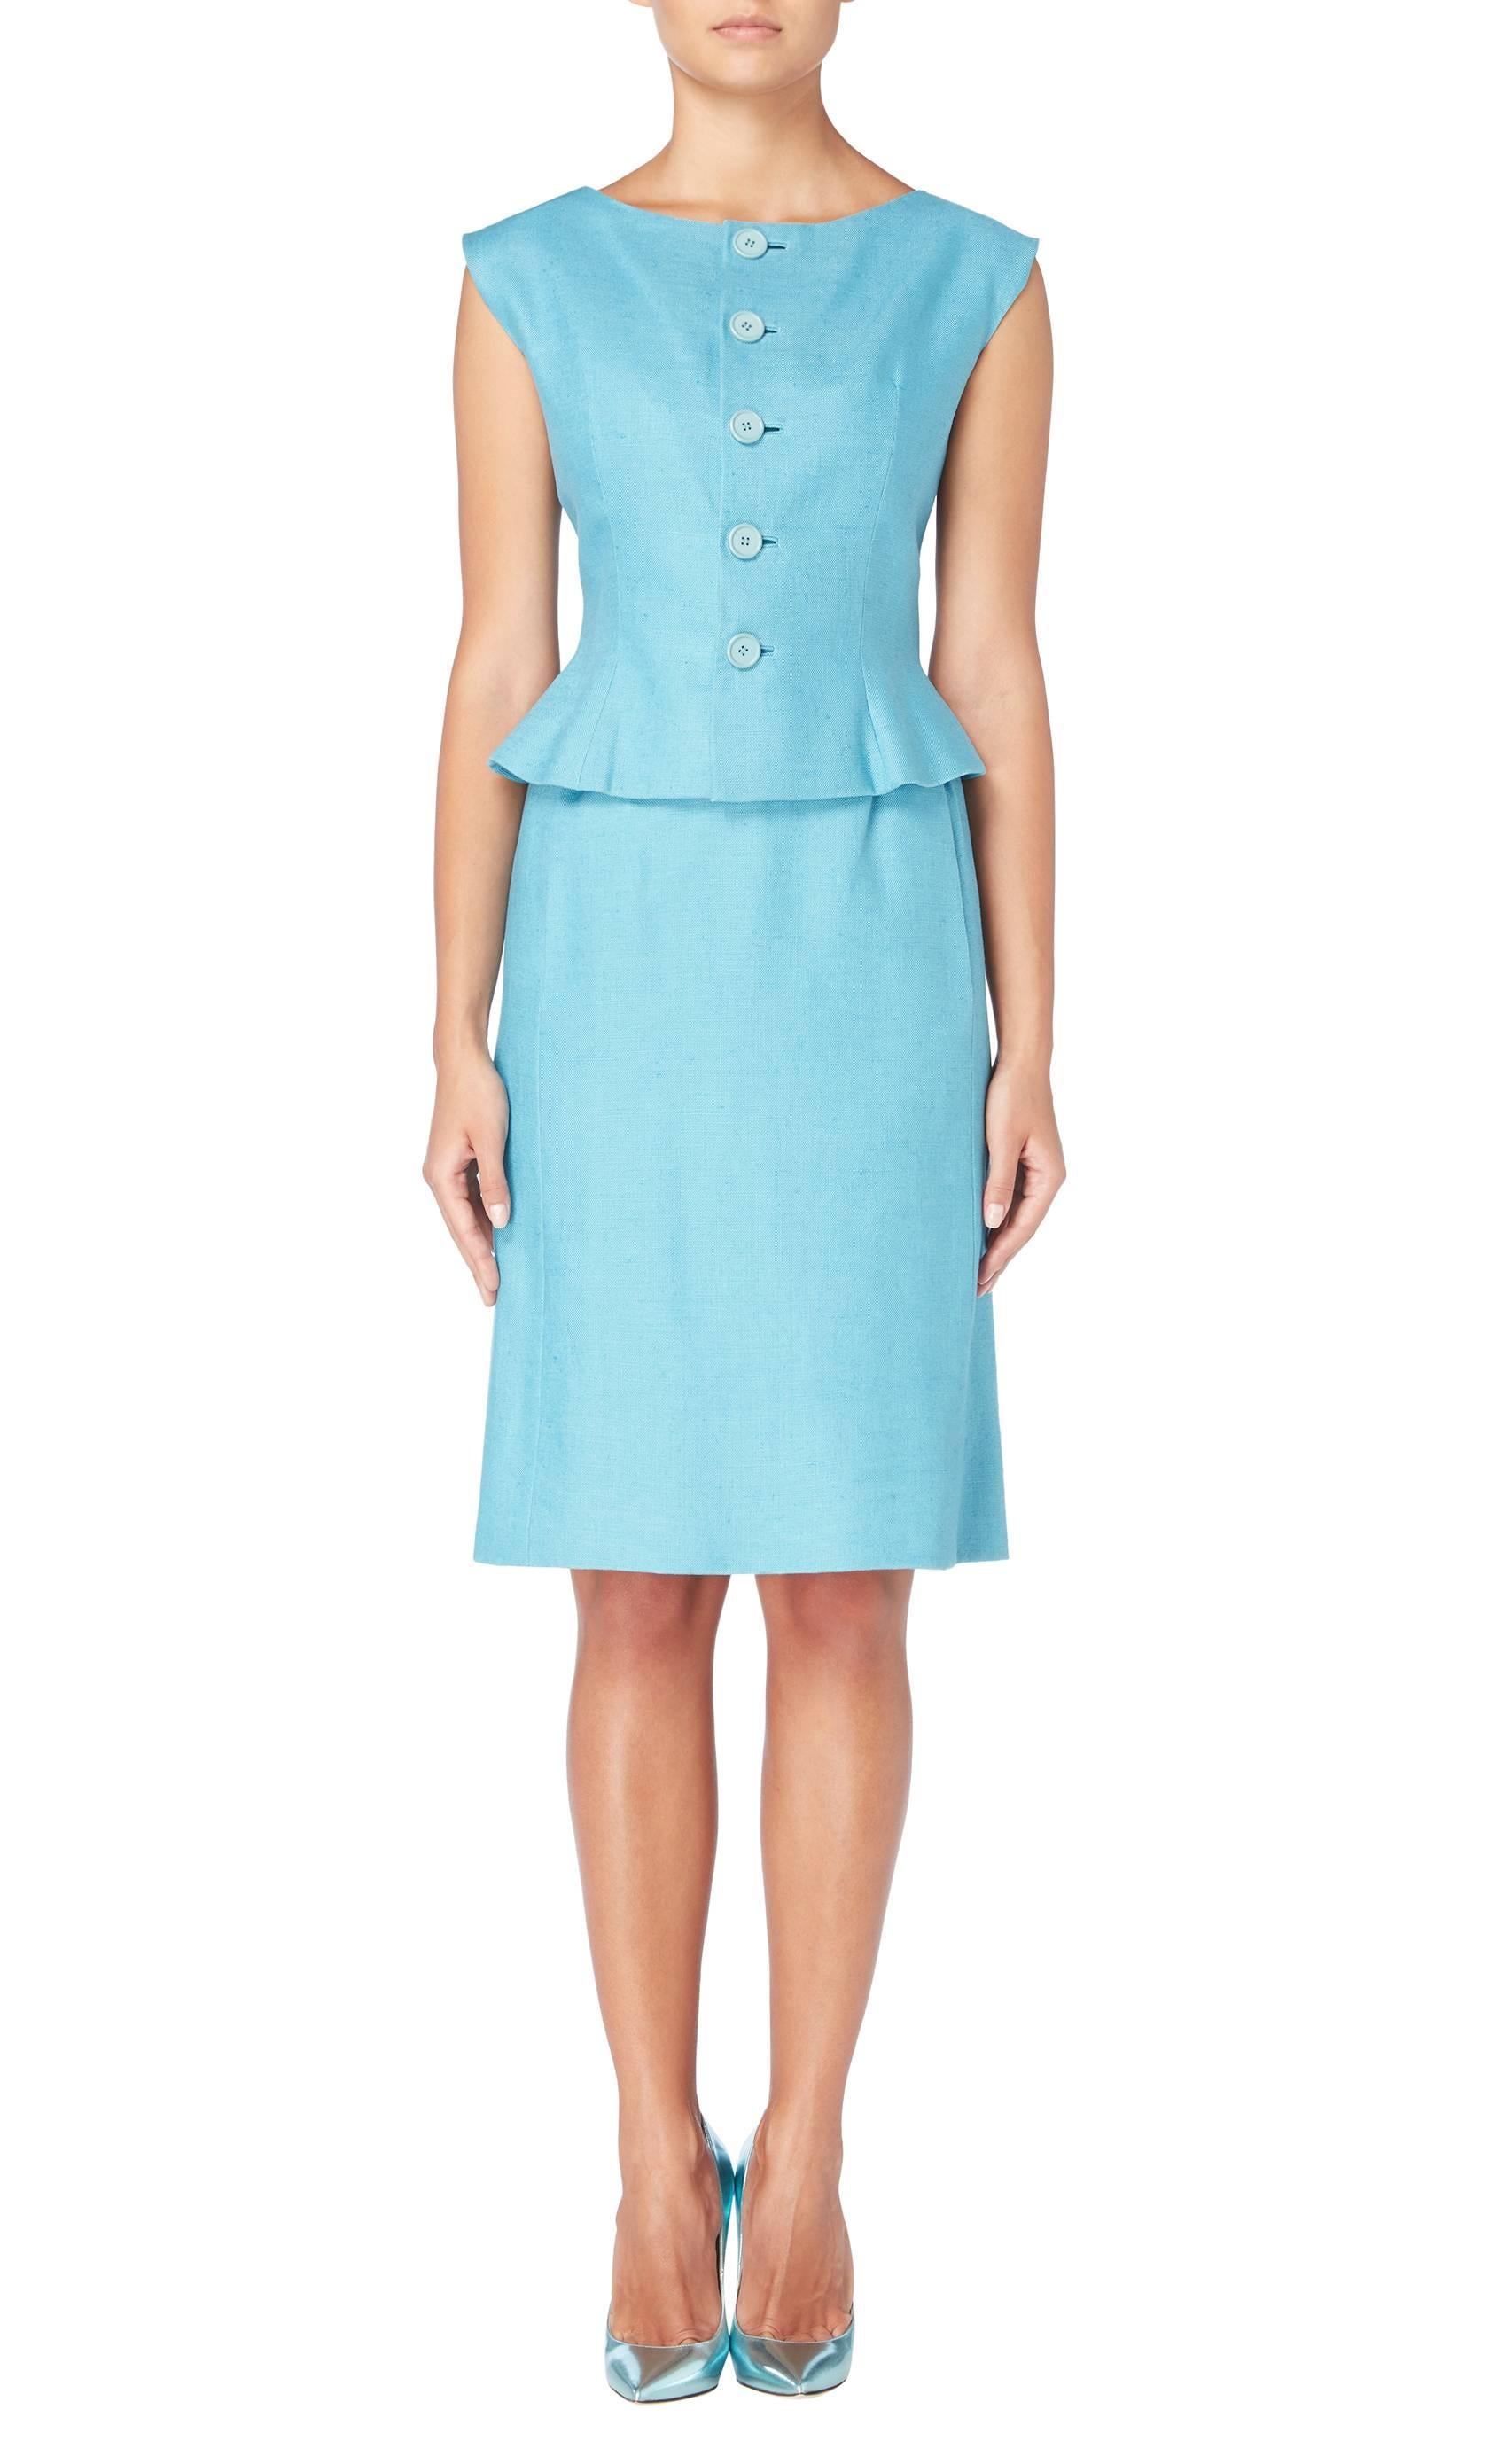 A fantastic piece of summer tailoring, this Norell skirt suit will add a pop of colour to a work wear wardrobe. Constructed in sky blue linen and comprising of a sleeveless top and knee length skirt, the top features buttons to the front, flaring